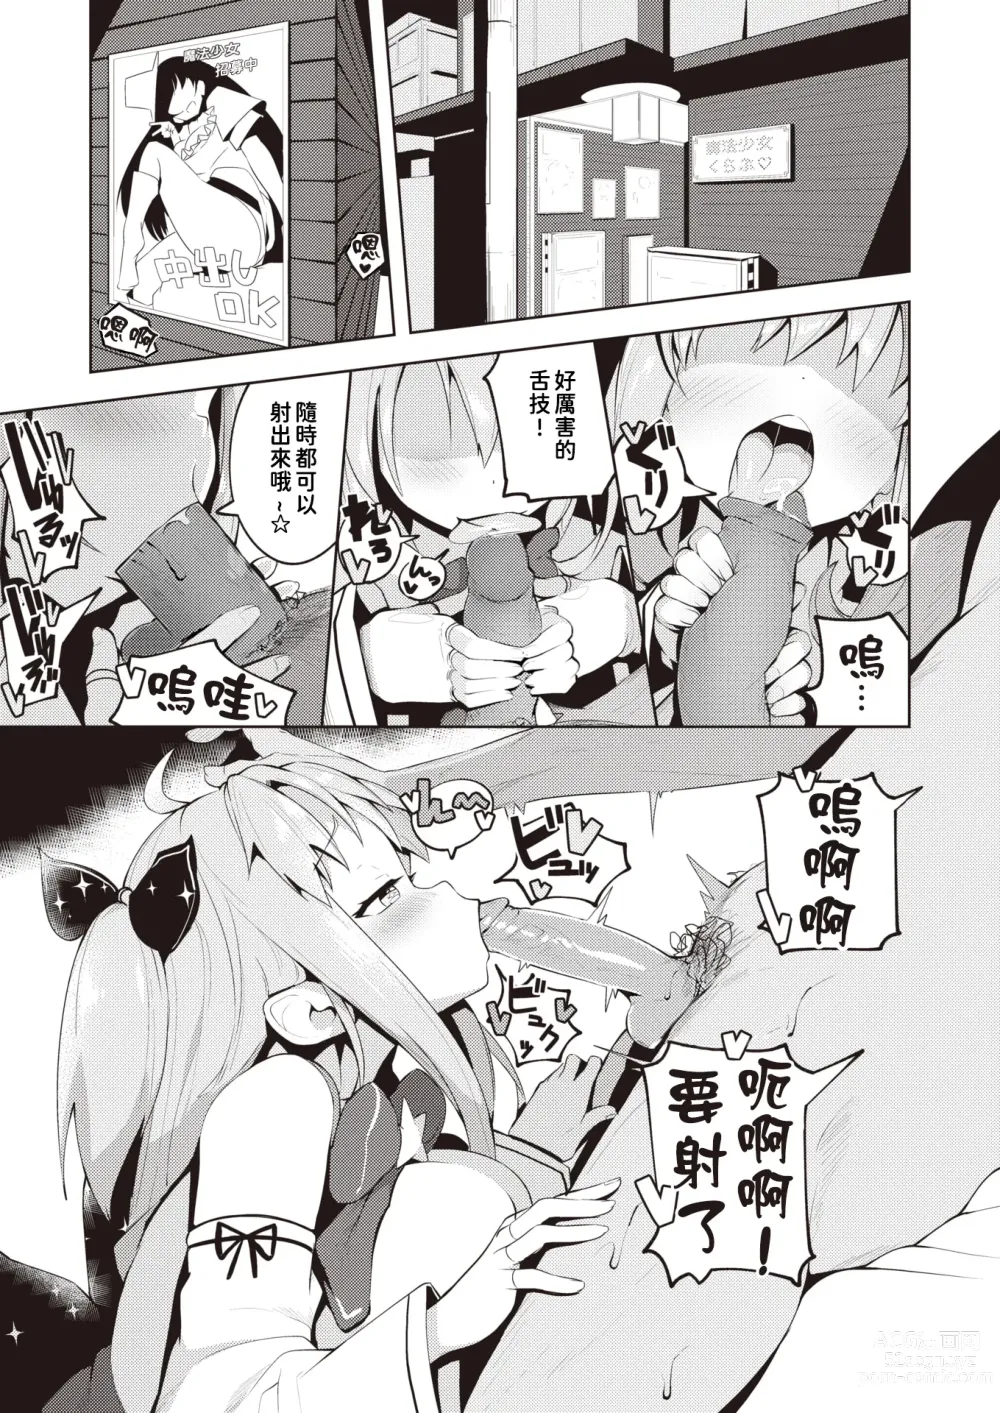 Page 3 of manga Magical Witch (decensored)